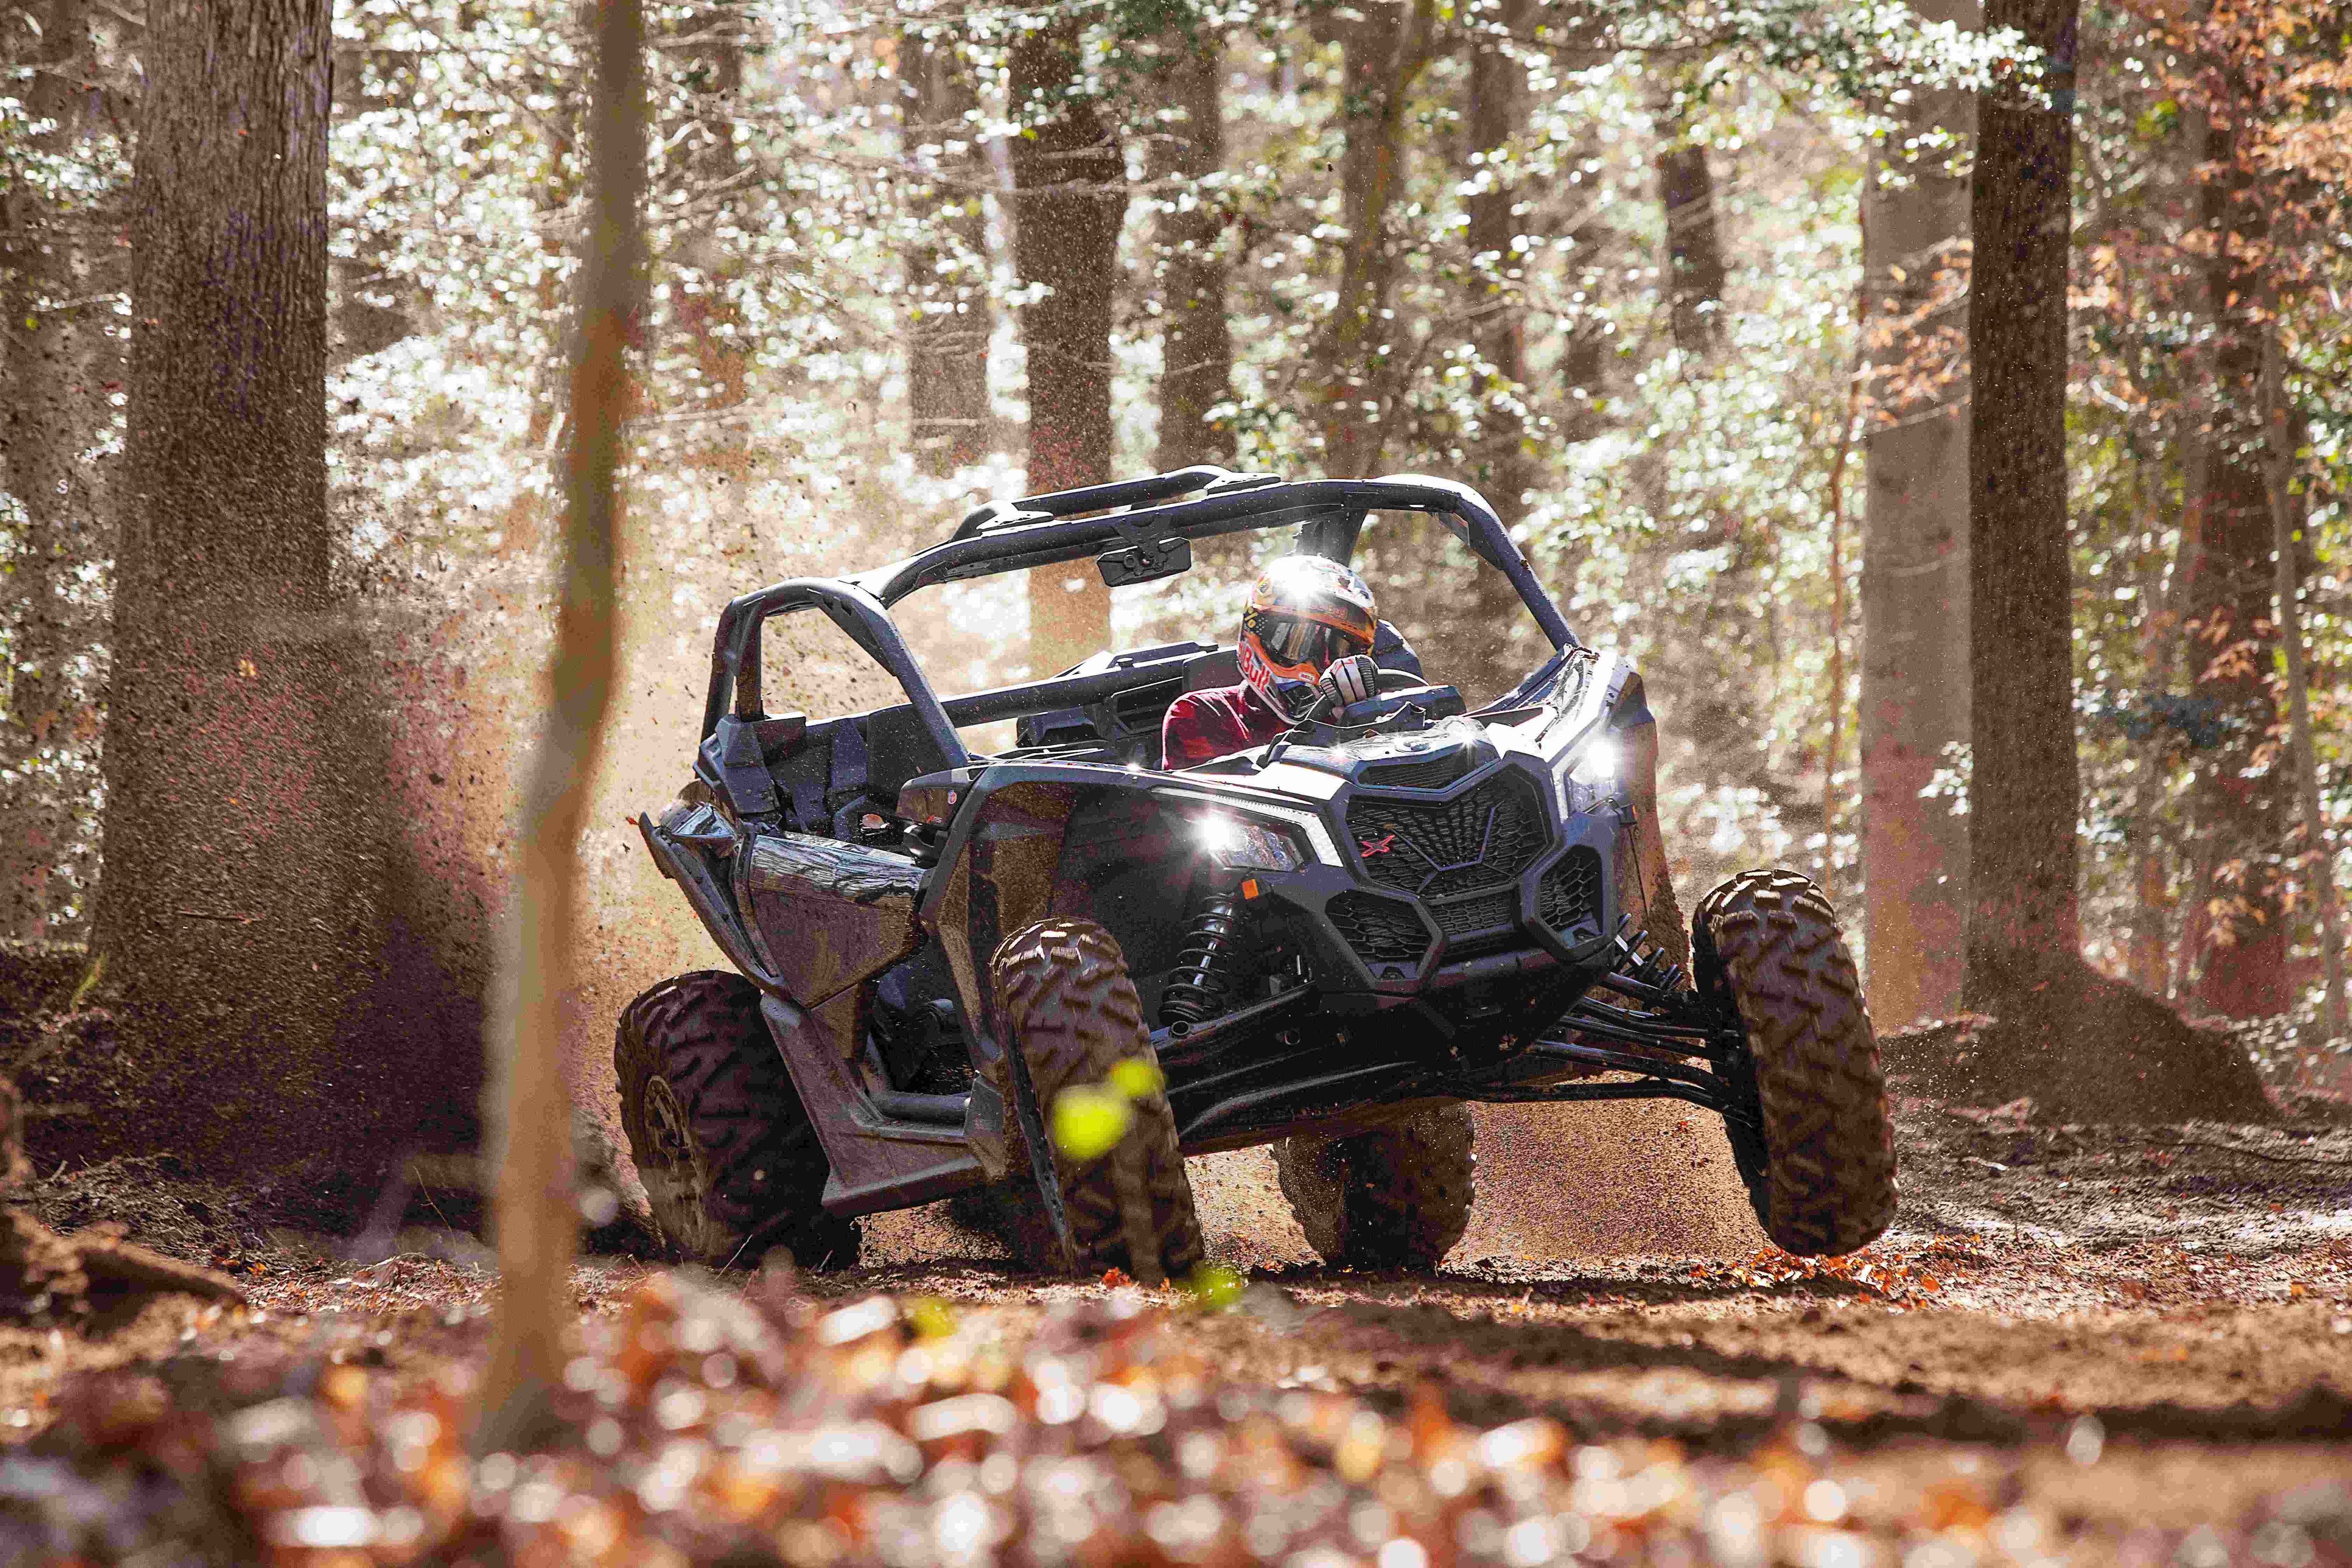 Discover all the Can-Am Off-Road ambassadors